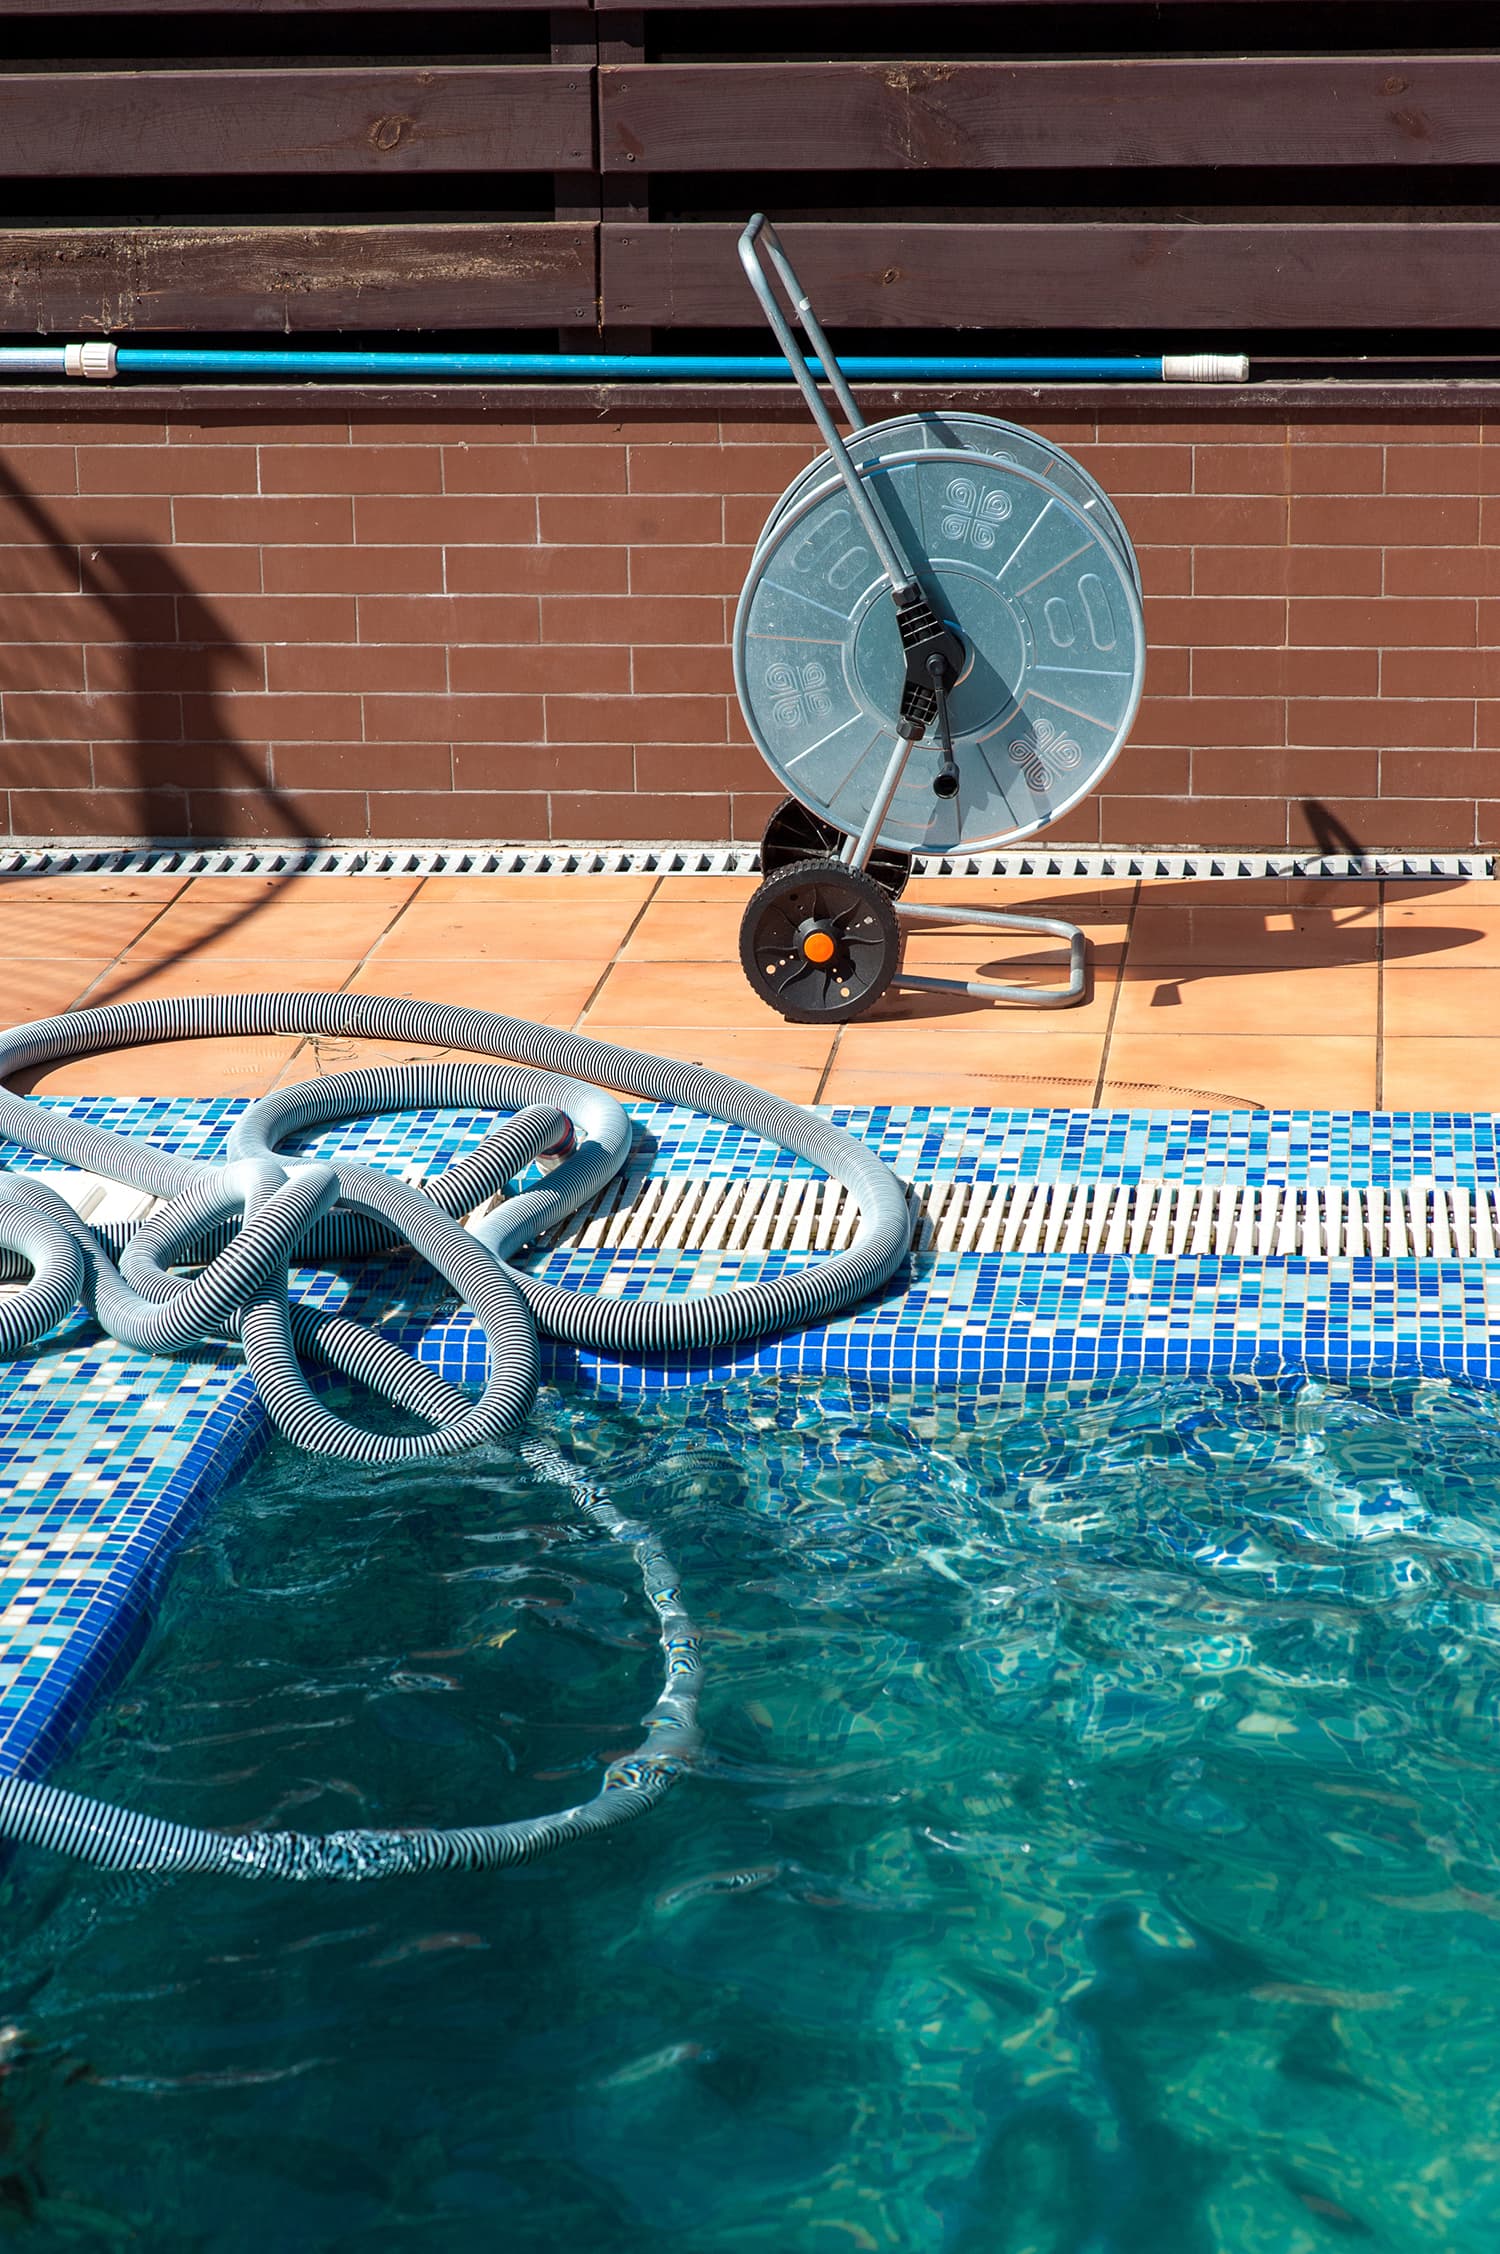 Swimming pool cleaning process, machine with tube